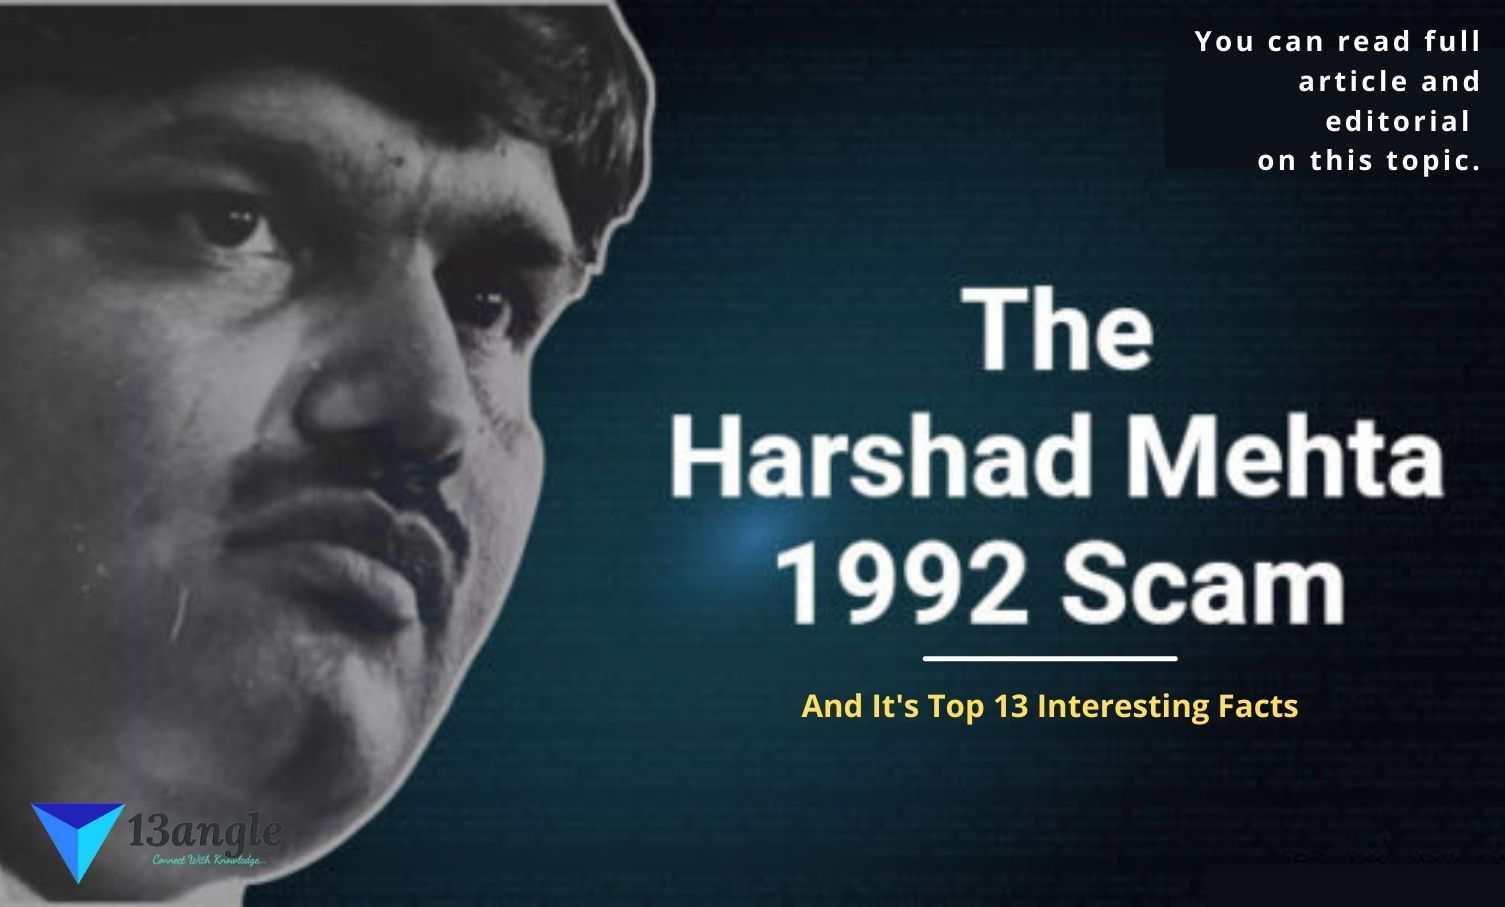 Indian Stock Market Scam 1992 And It's Top 13 Interesting Facts- 13angle.com